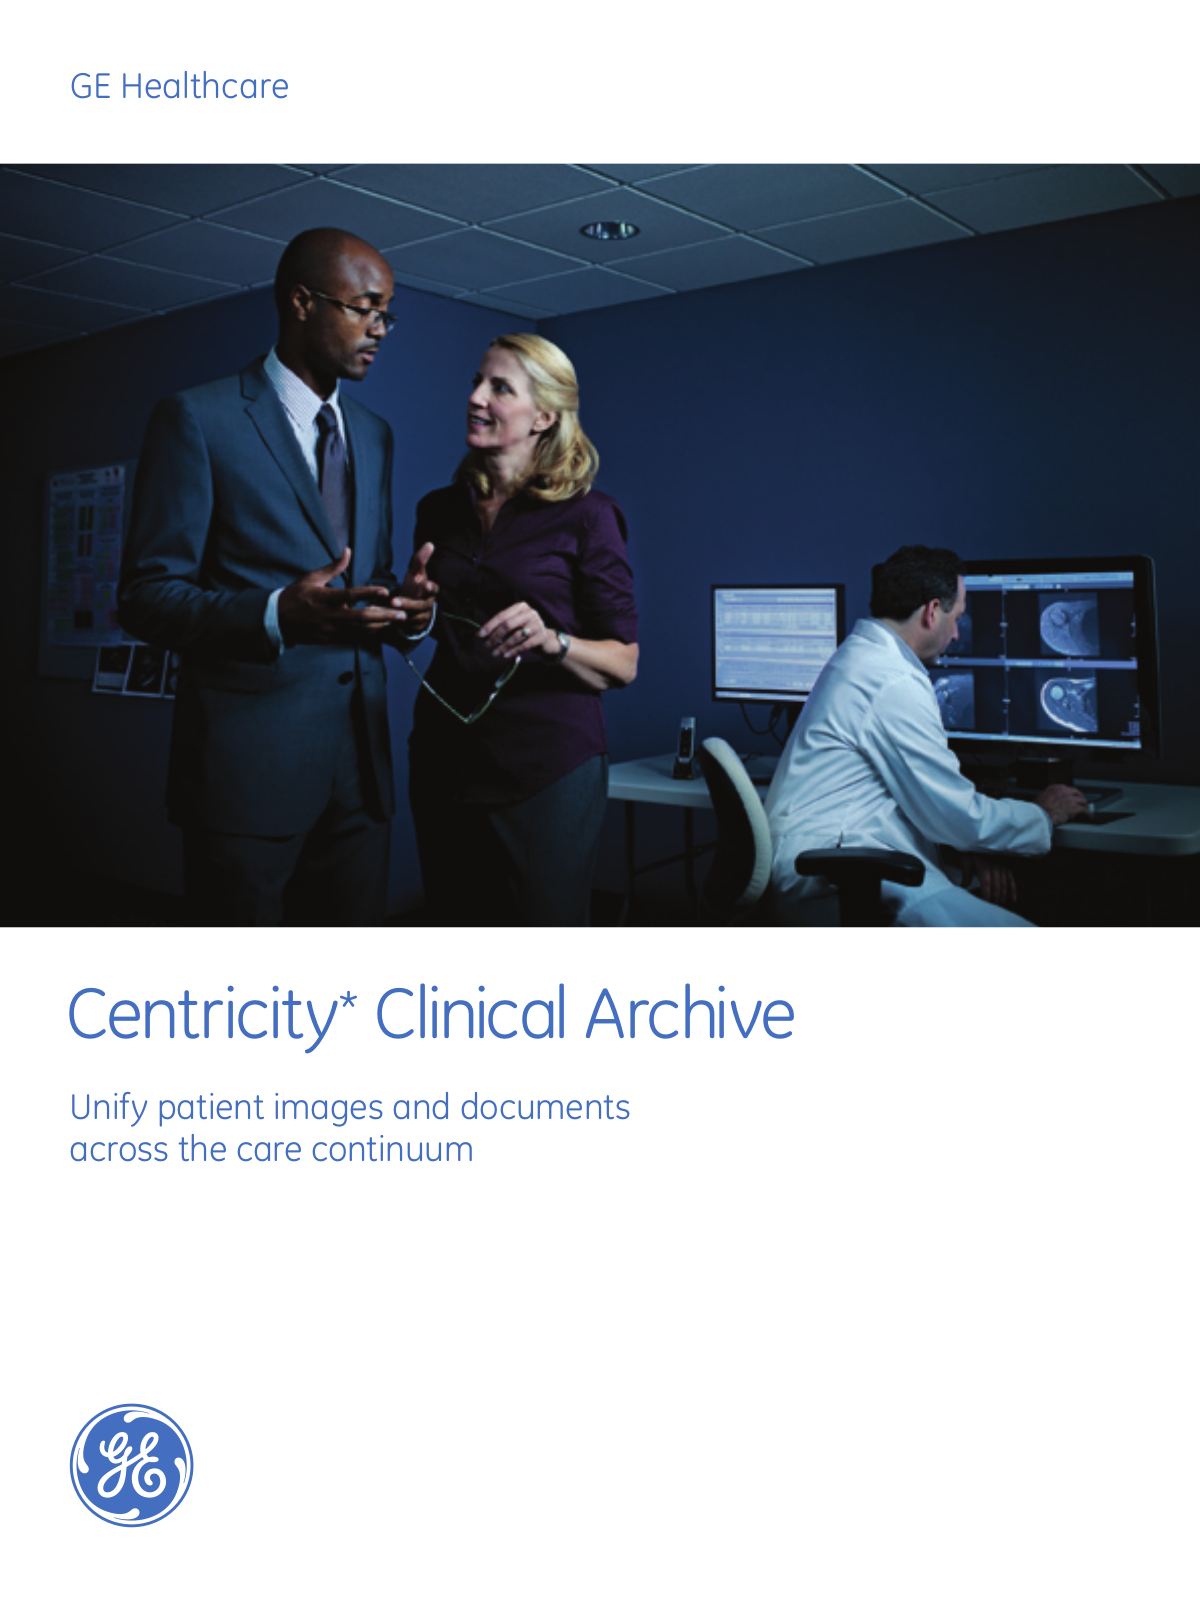 GE Healthcare Centricity Clinical Archive Brochure